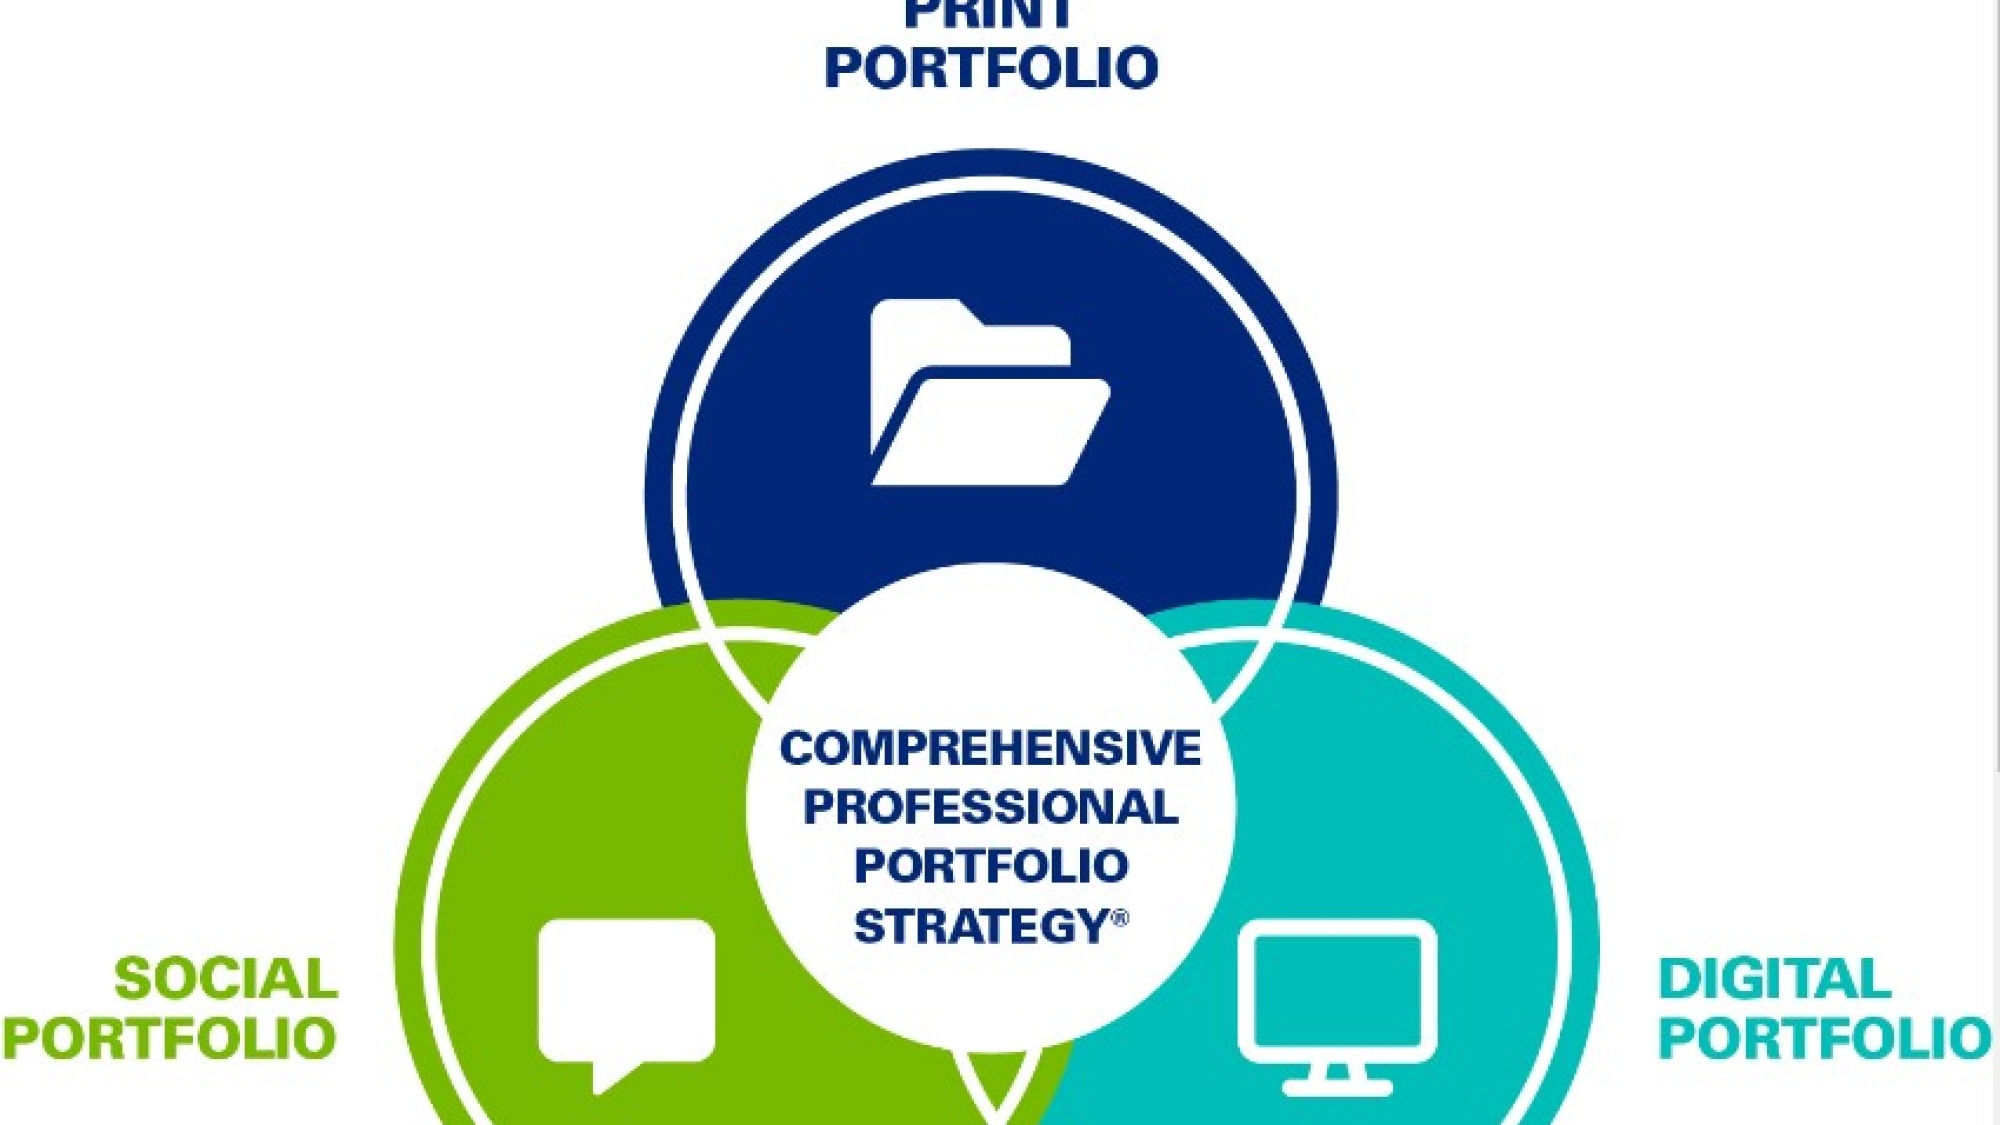 What is a digital portfolio and how is it made